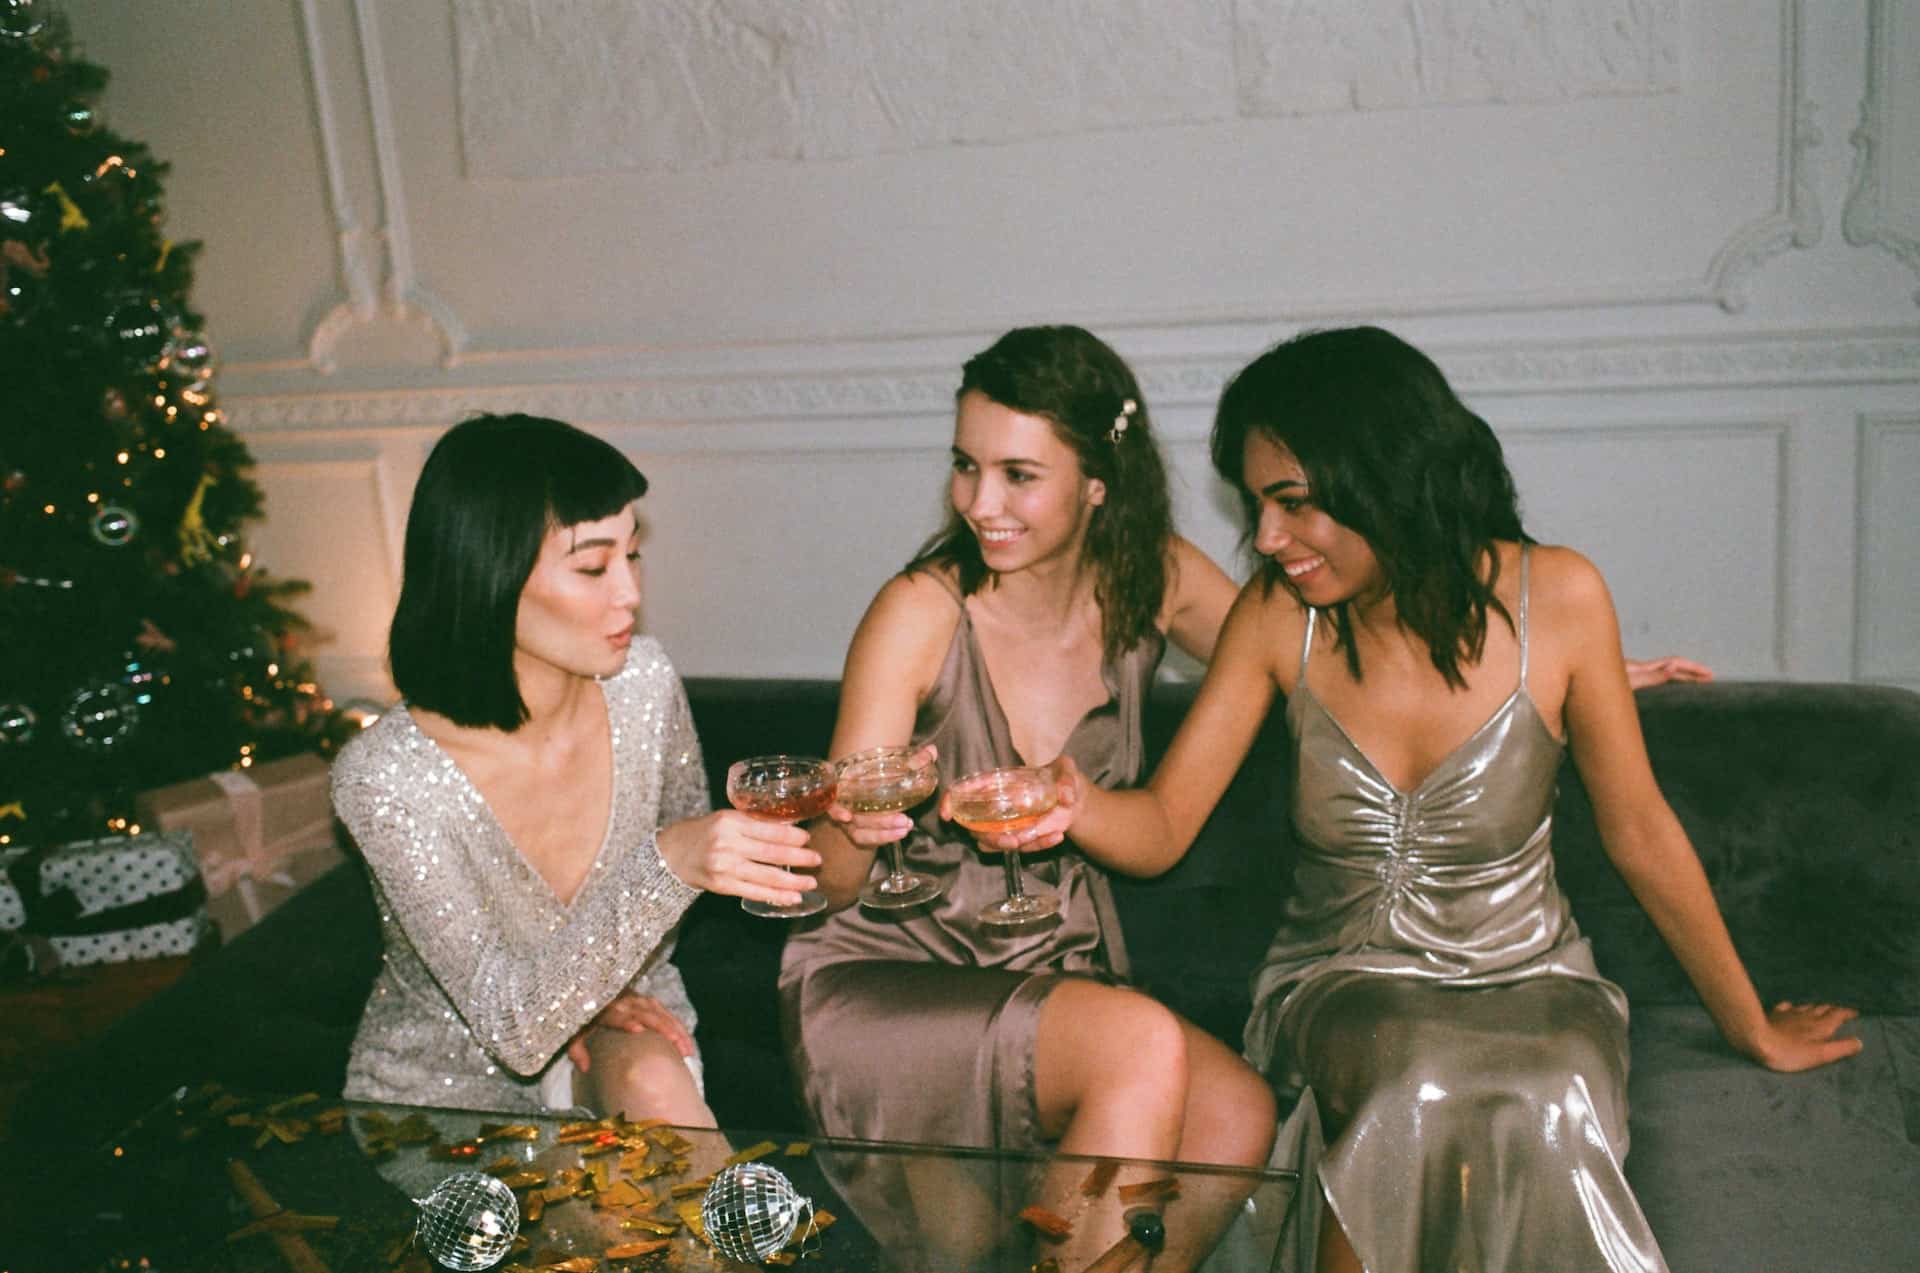 women at a formal party